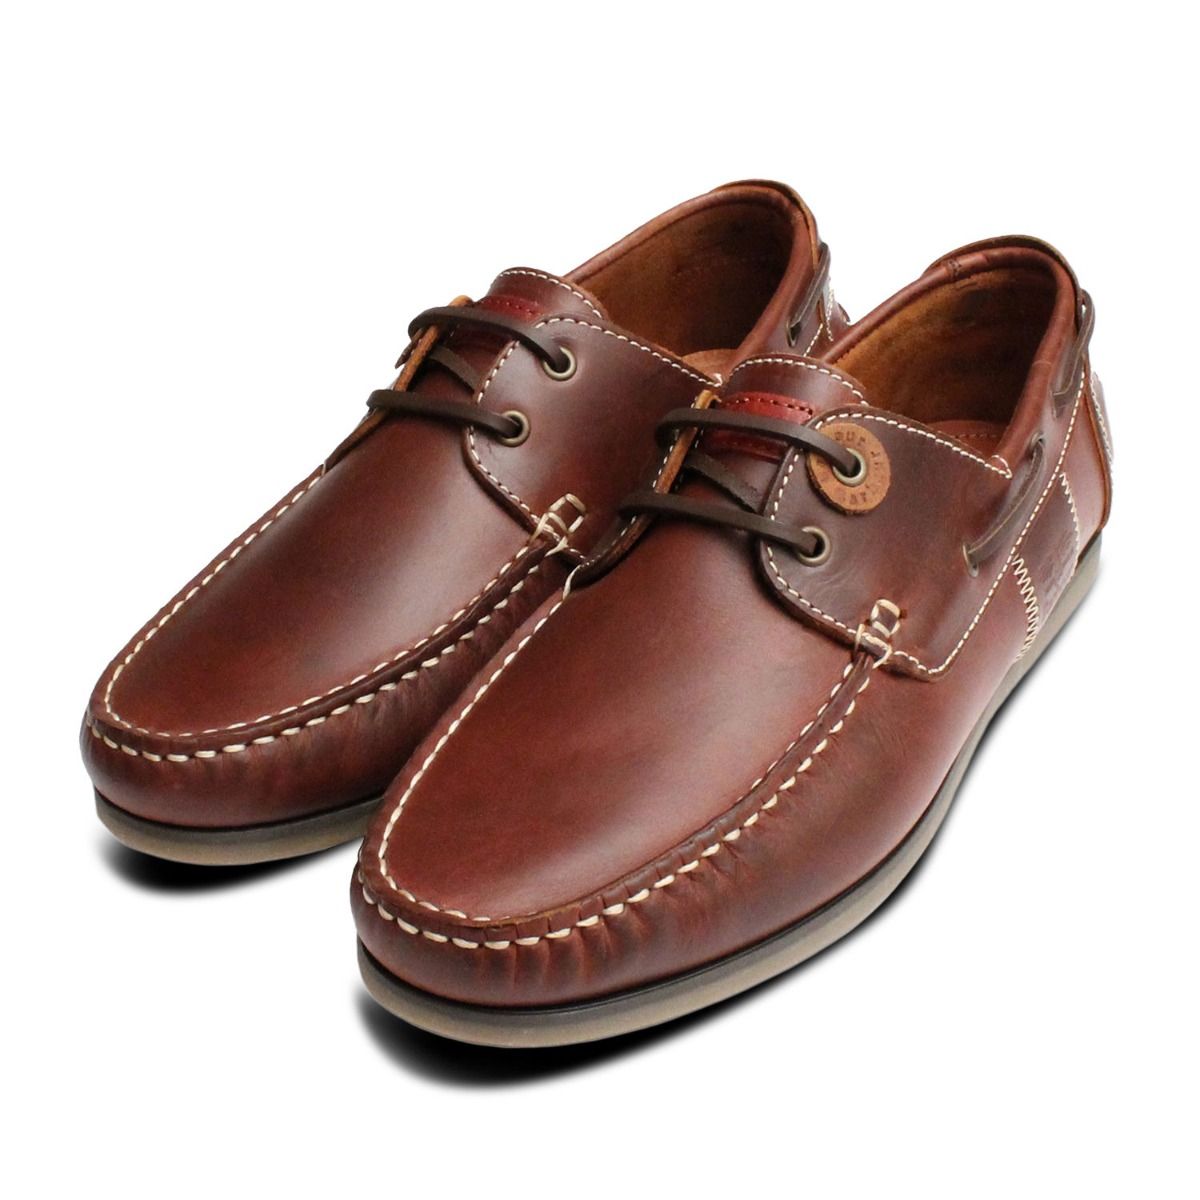 barbour boat shoes